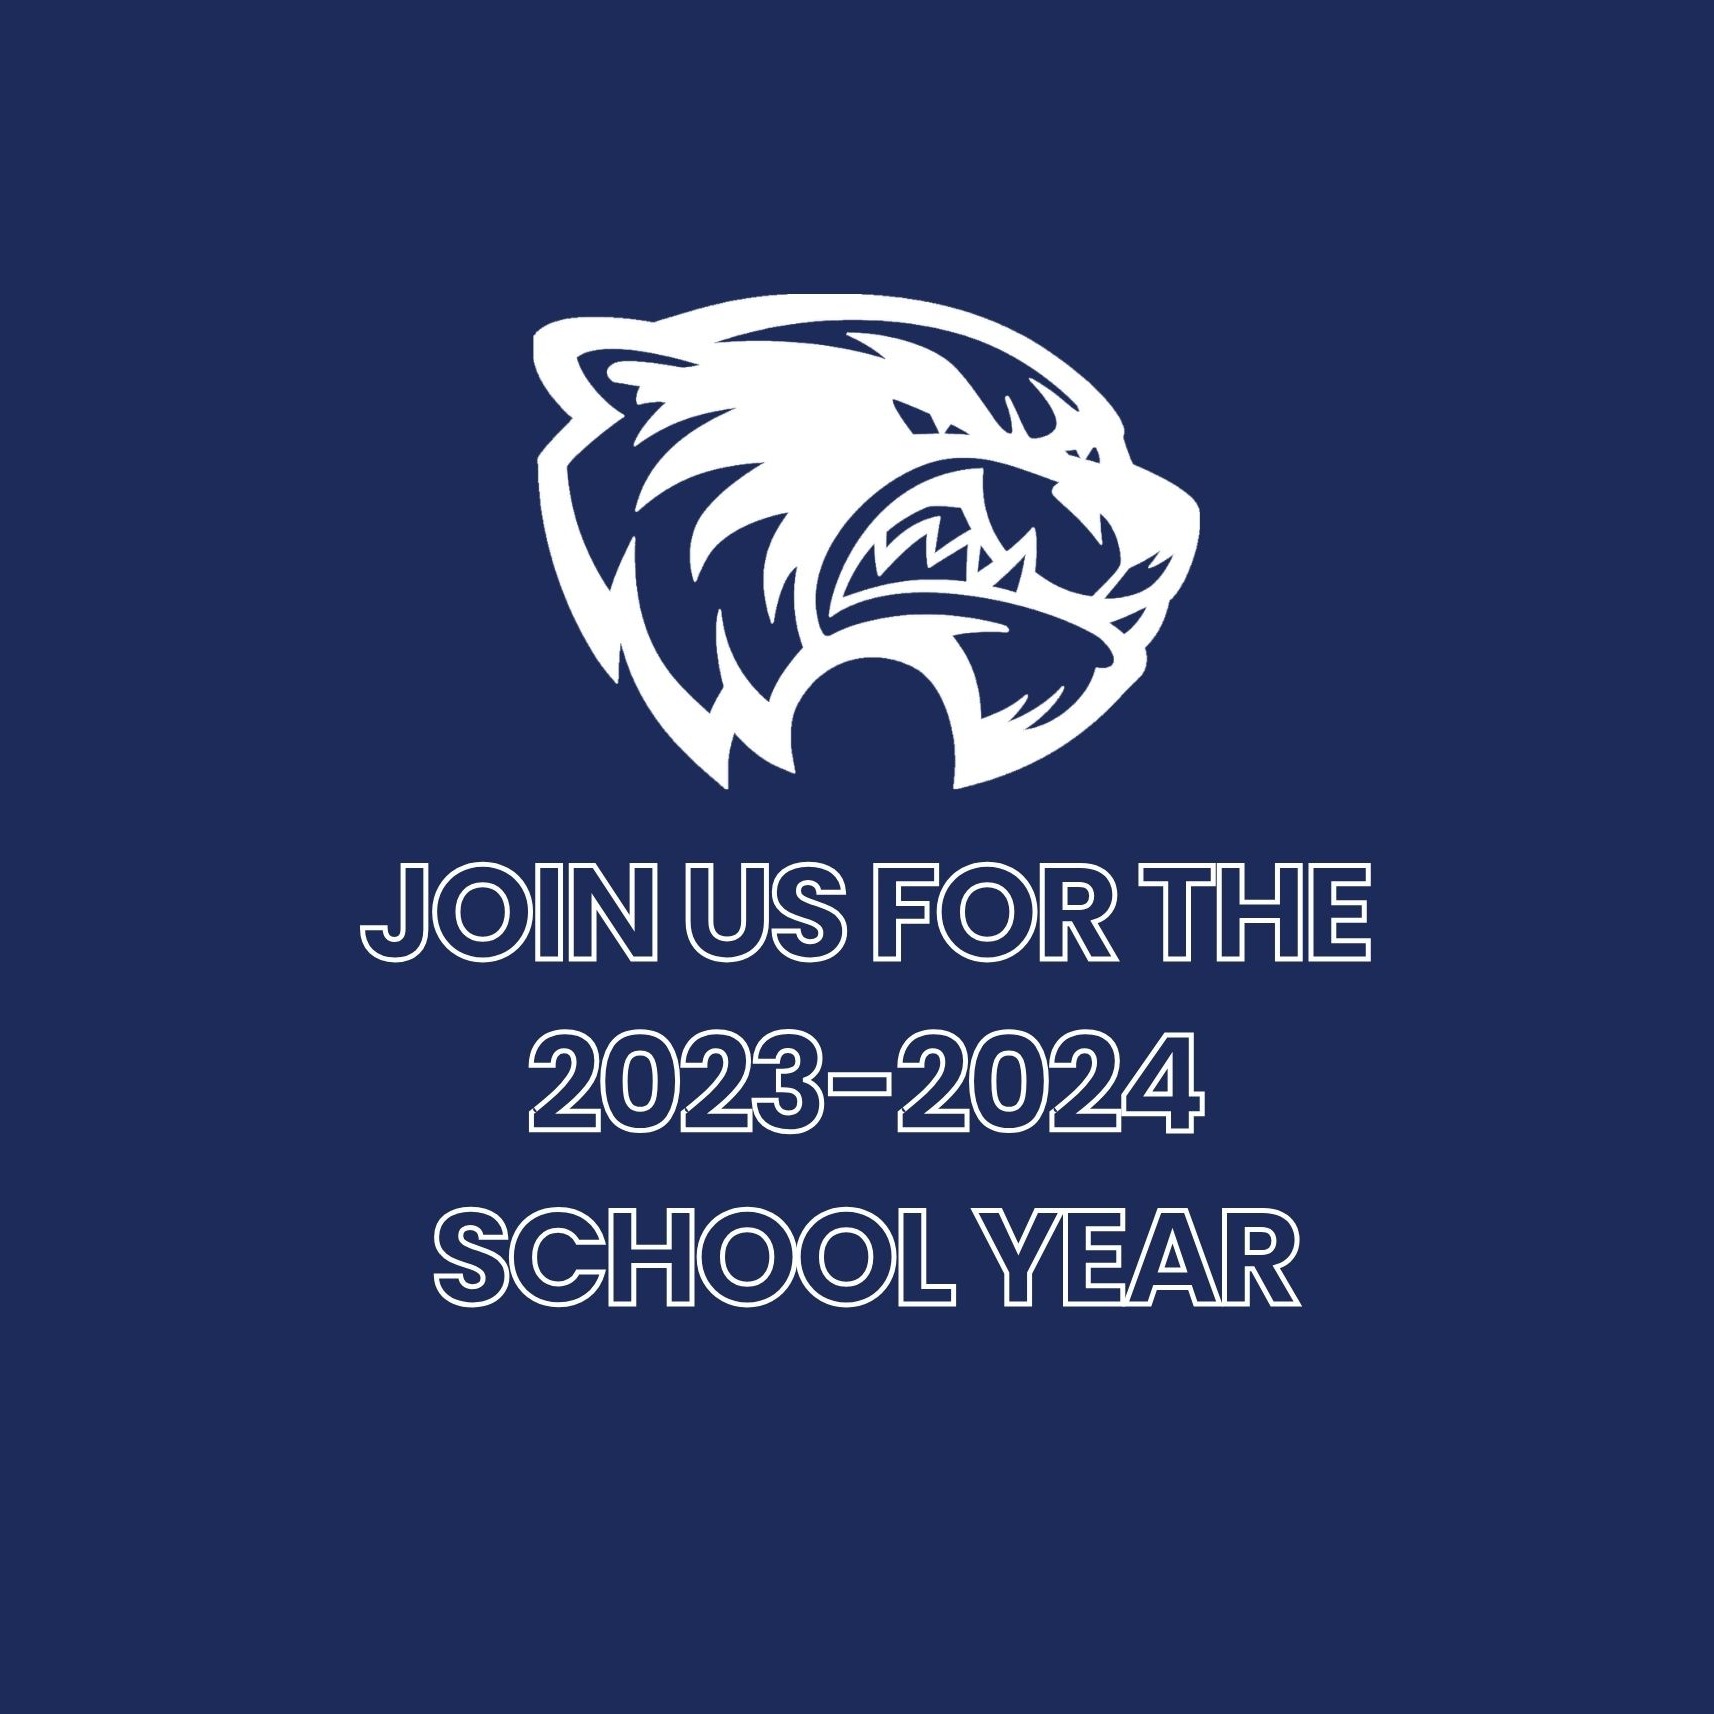 Join us for the 23-24 school year